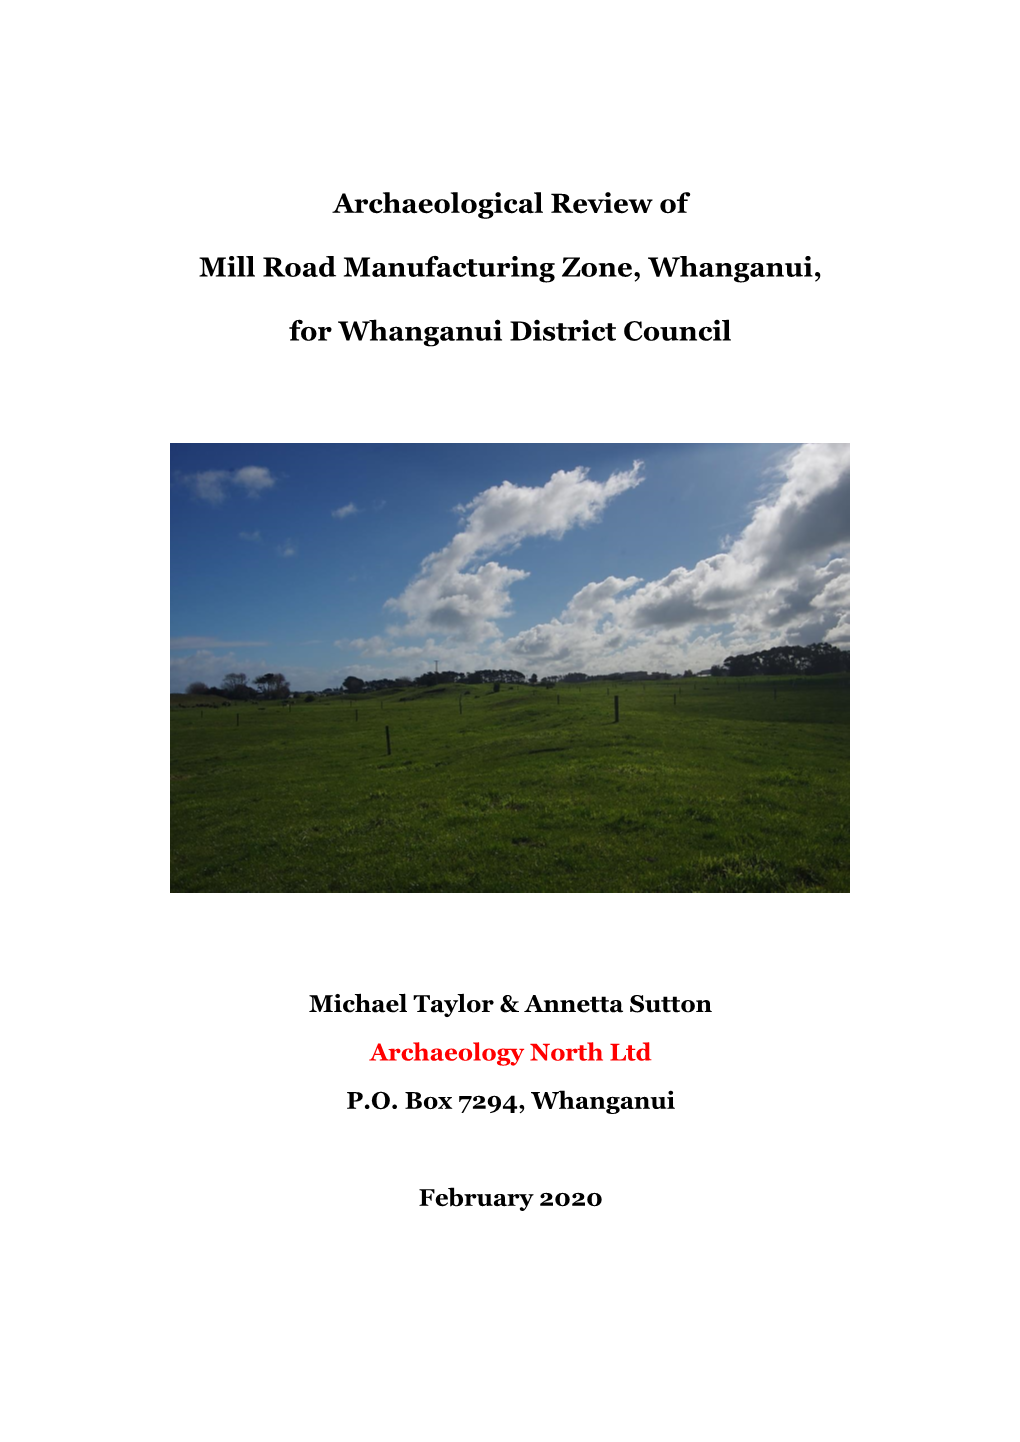 Archaeological Review of Mill Road Manufacturing Zone, Whanganui